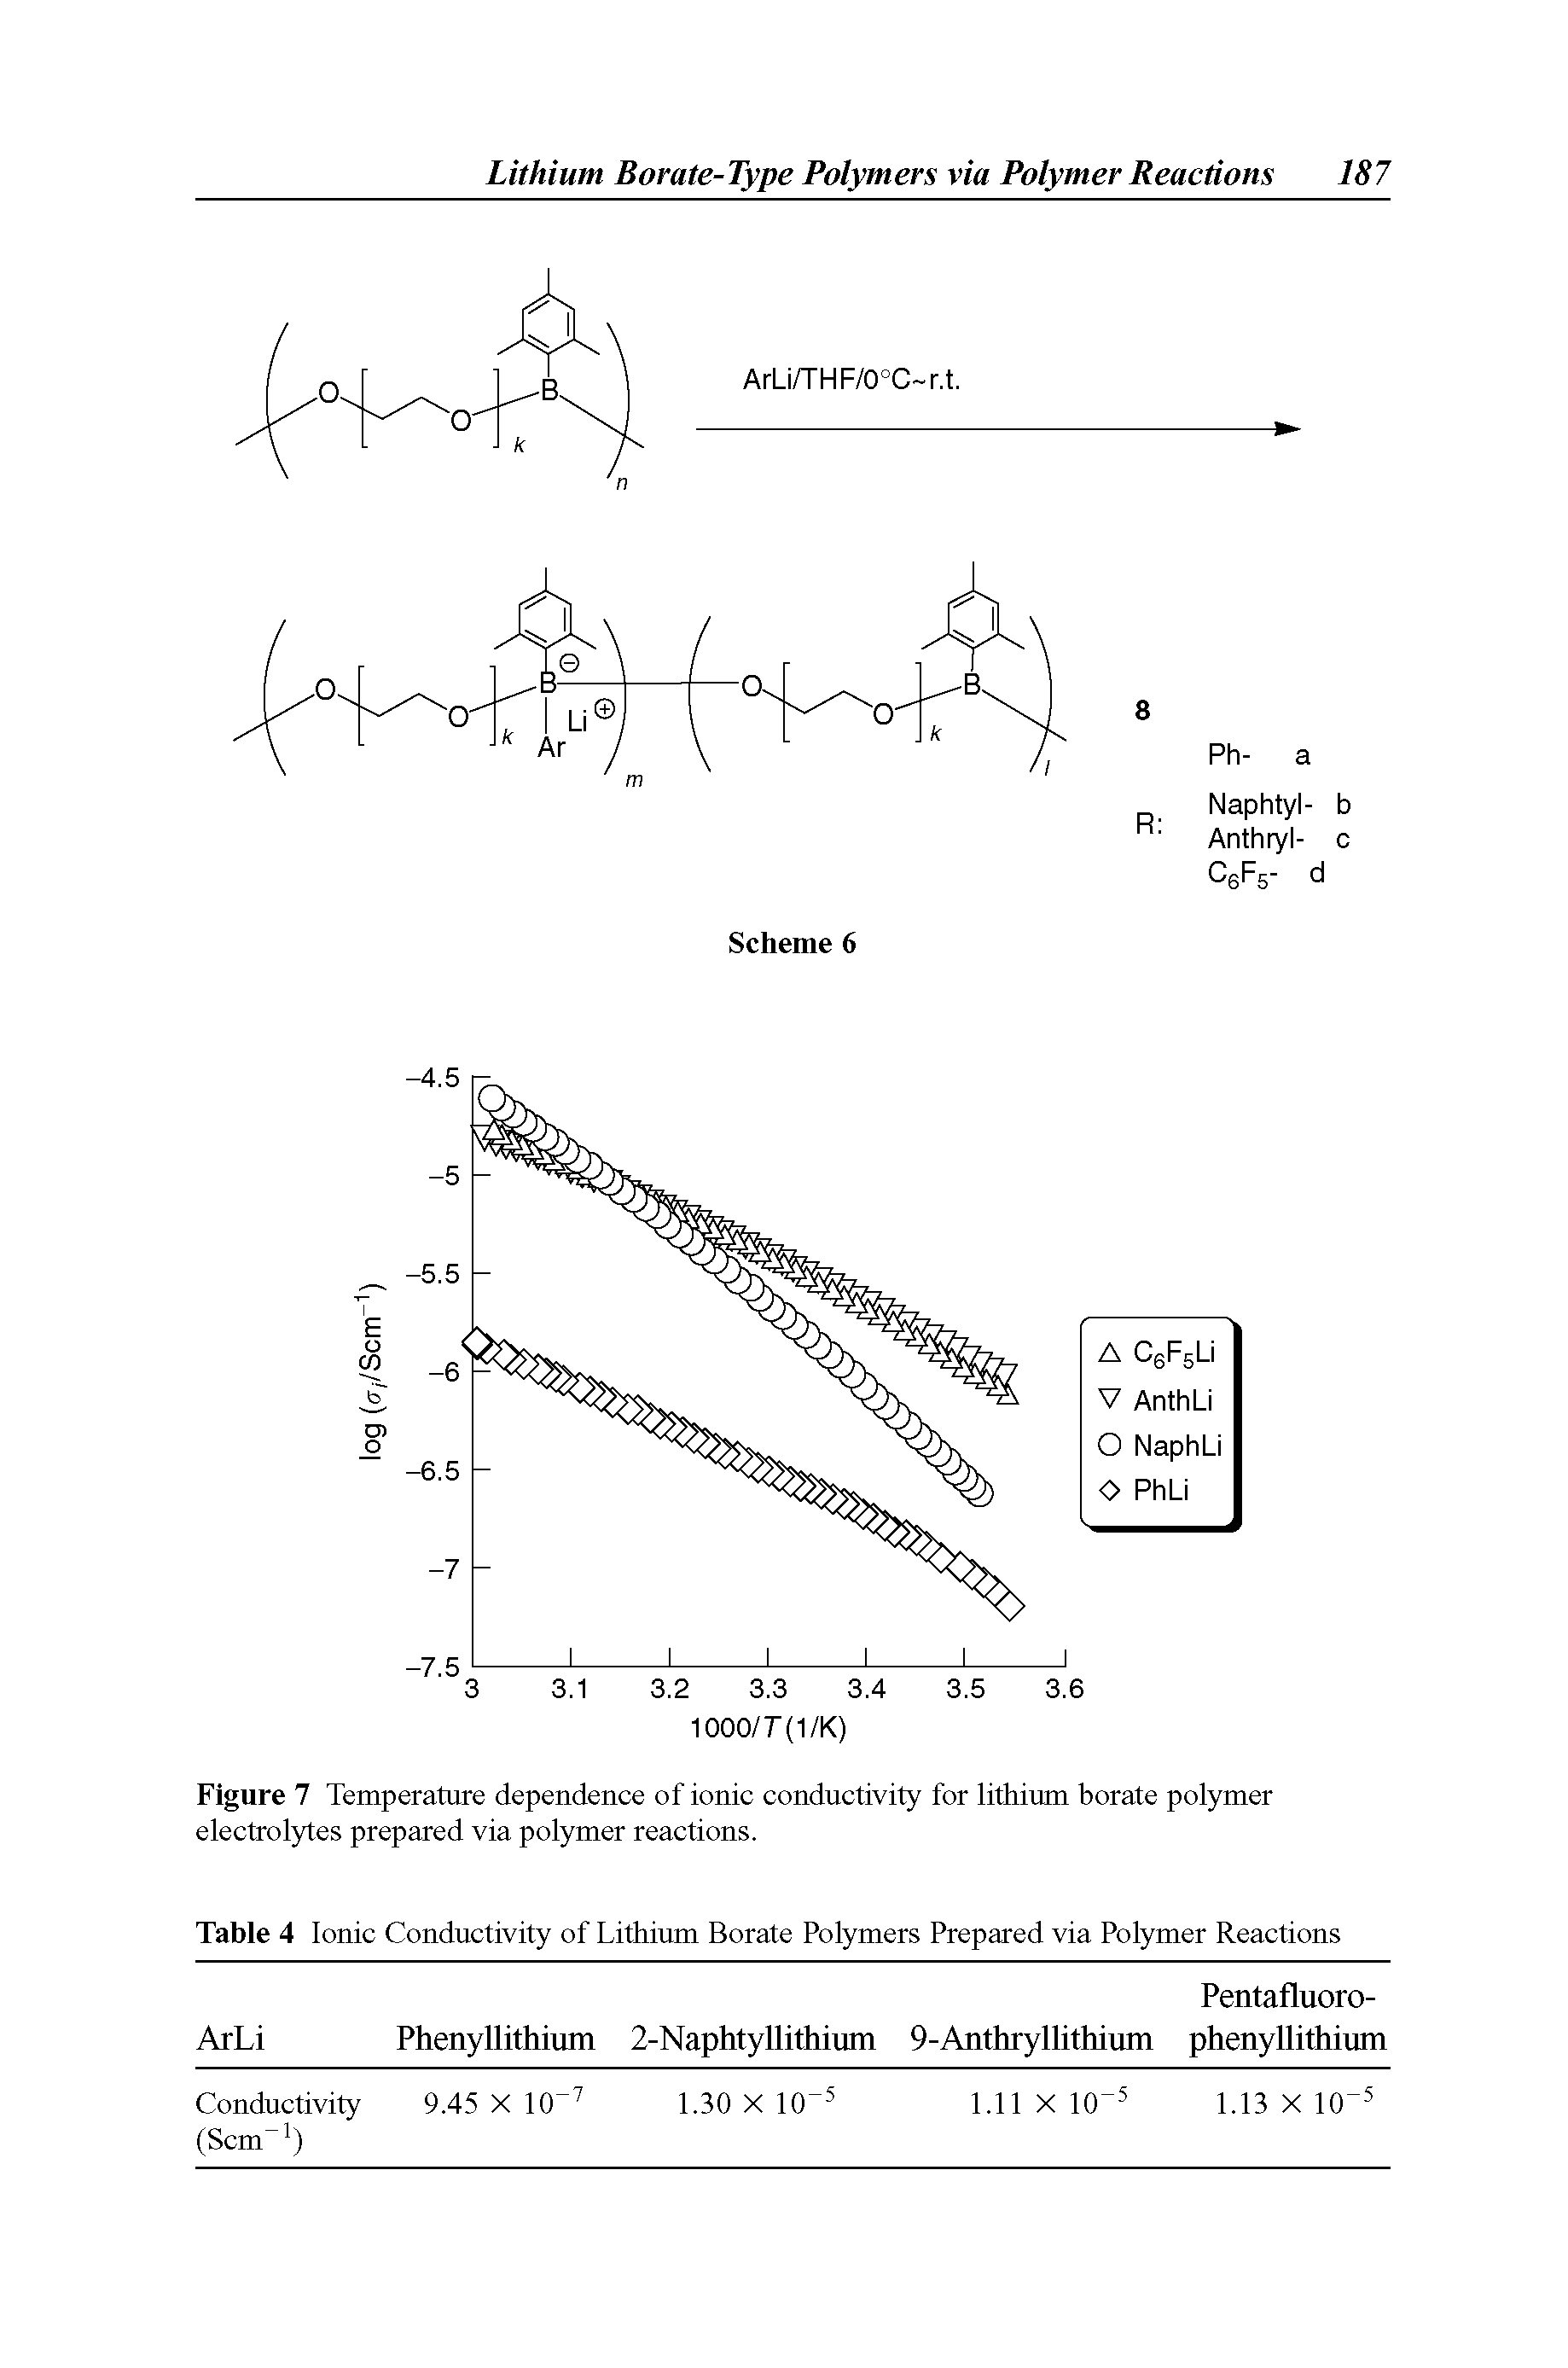 Figure 7 Temperature dependence of ionic conductivity for lithium borate polymer electrolytes prepared via polymer reactions.